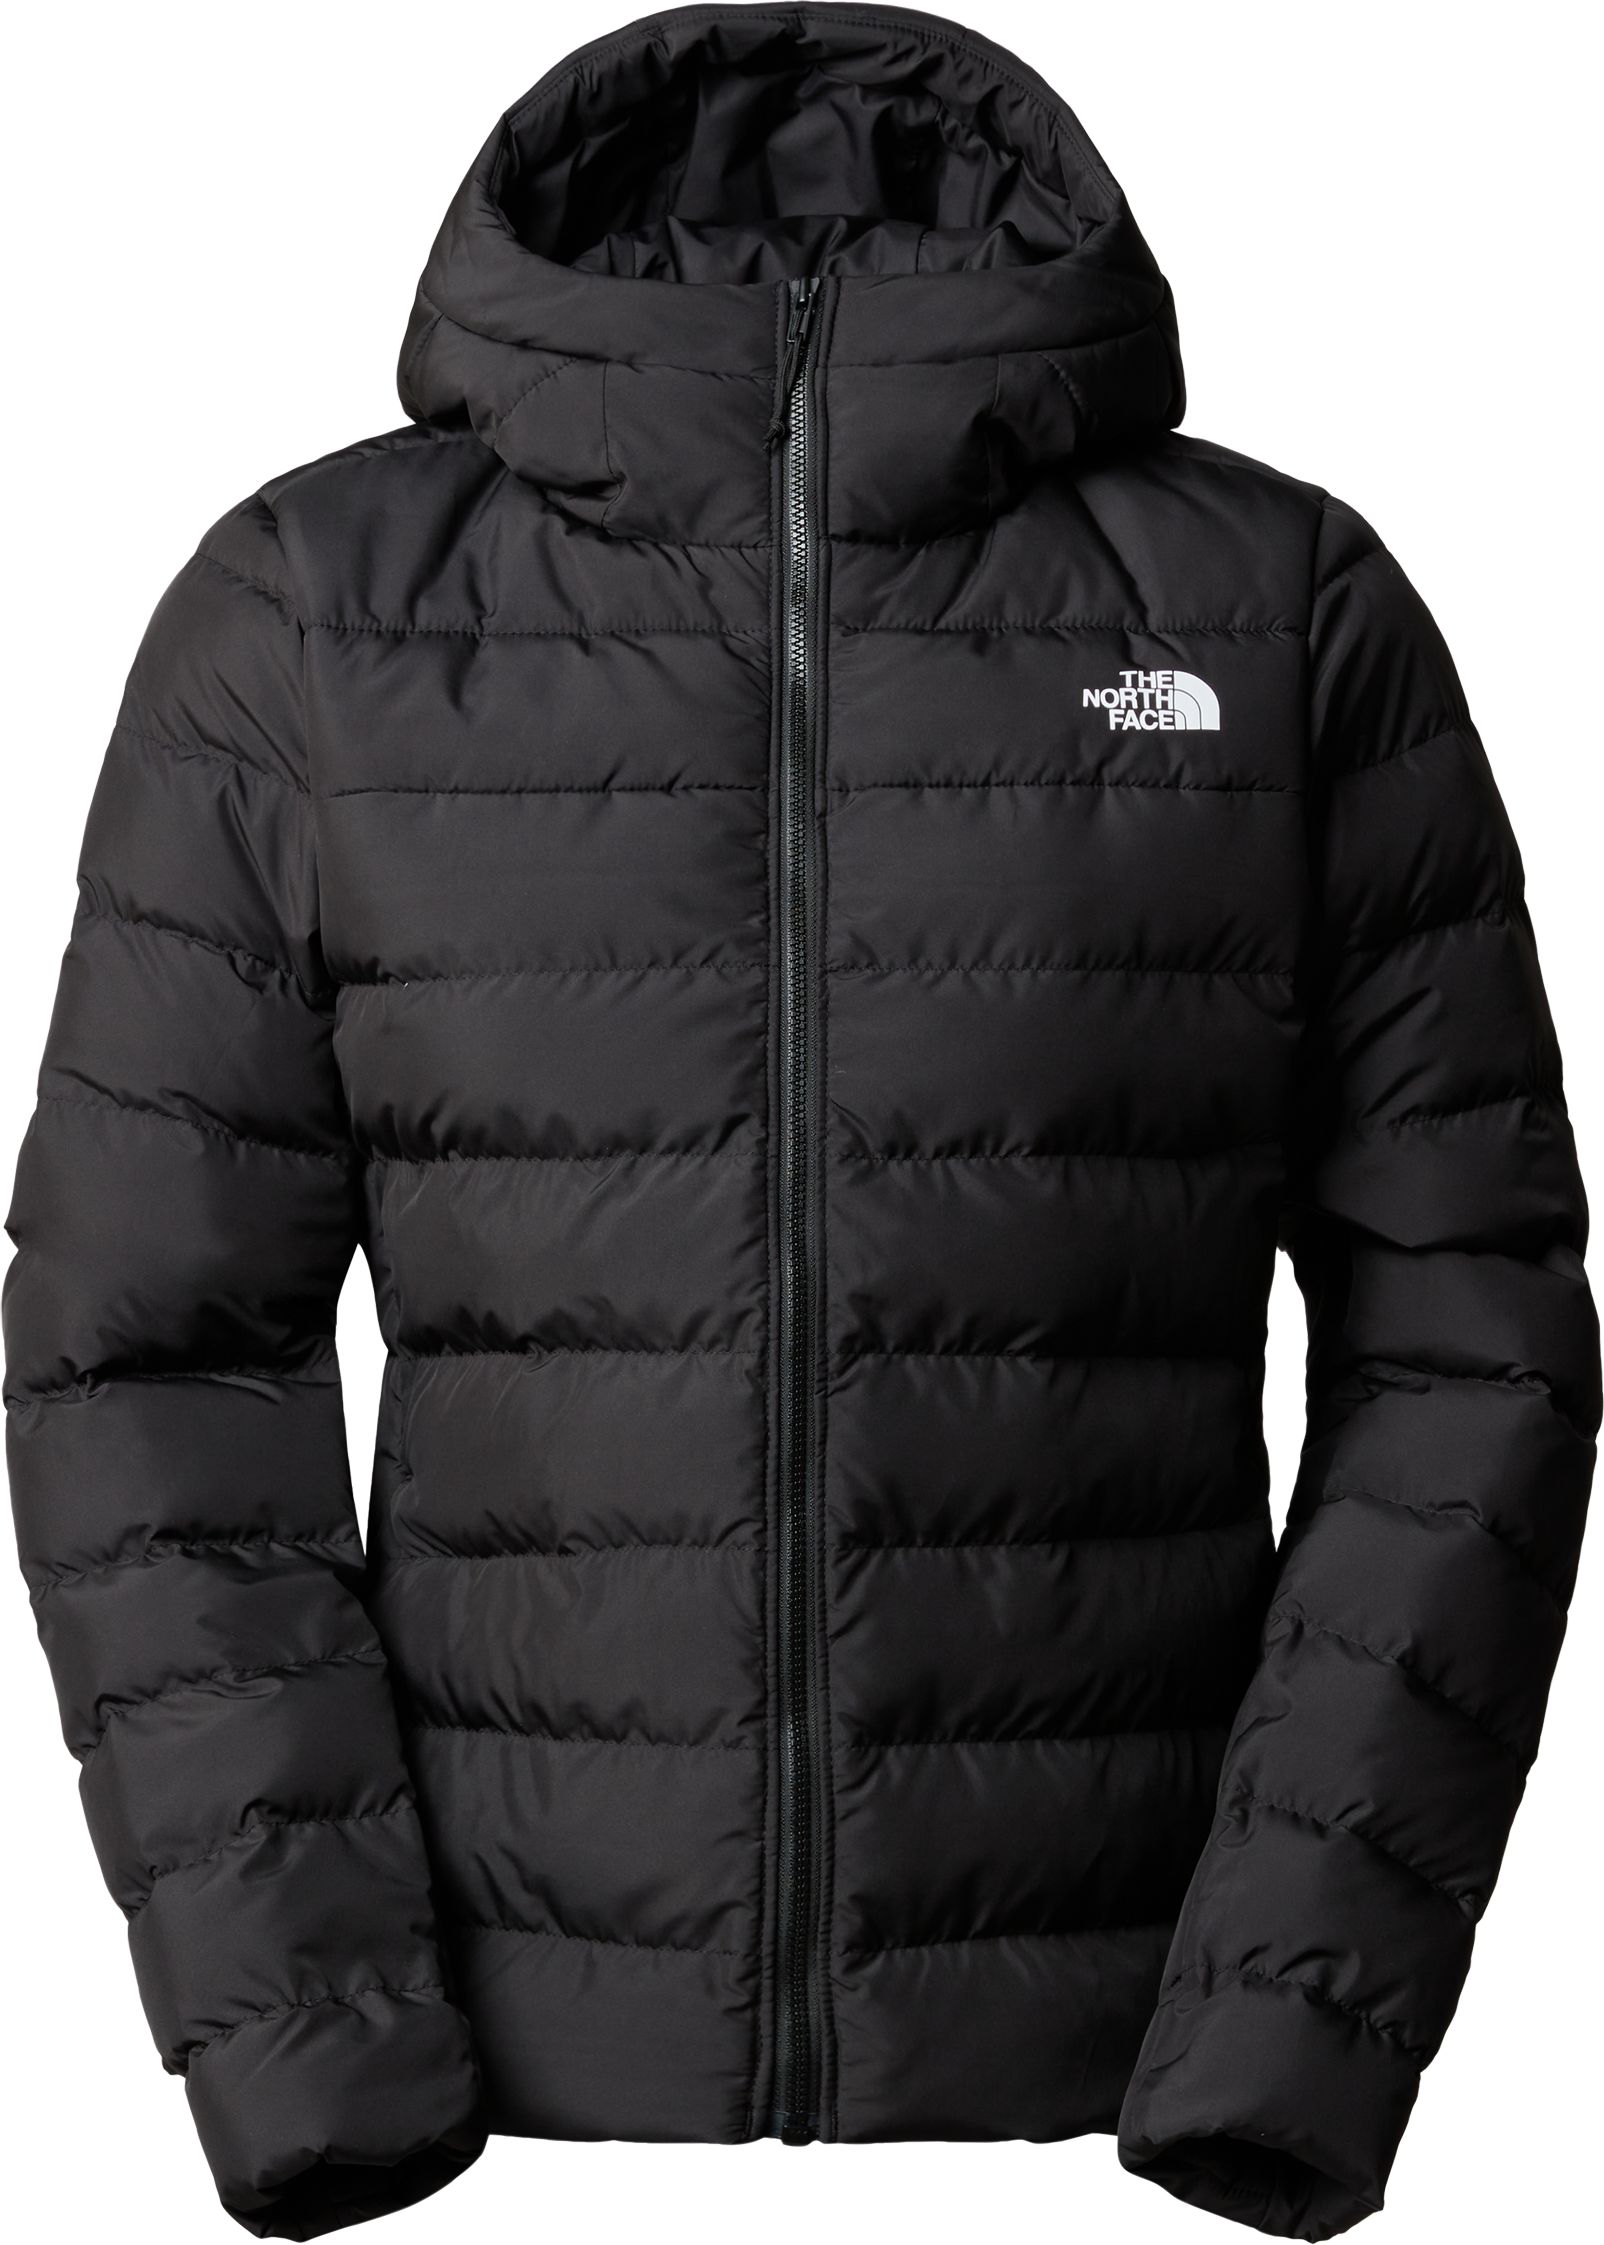 THE NORTH FACE, W ACONCAGUA 3 HOODIE